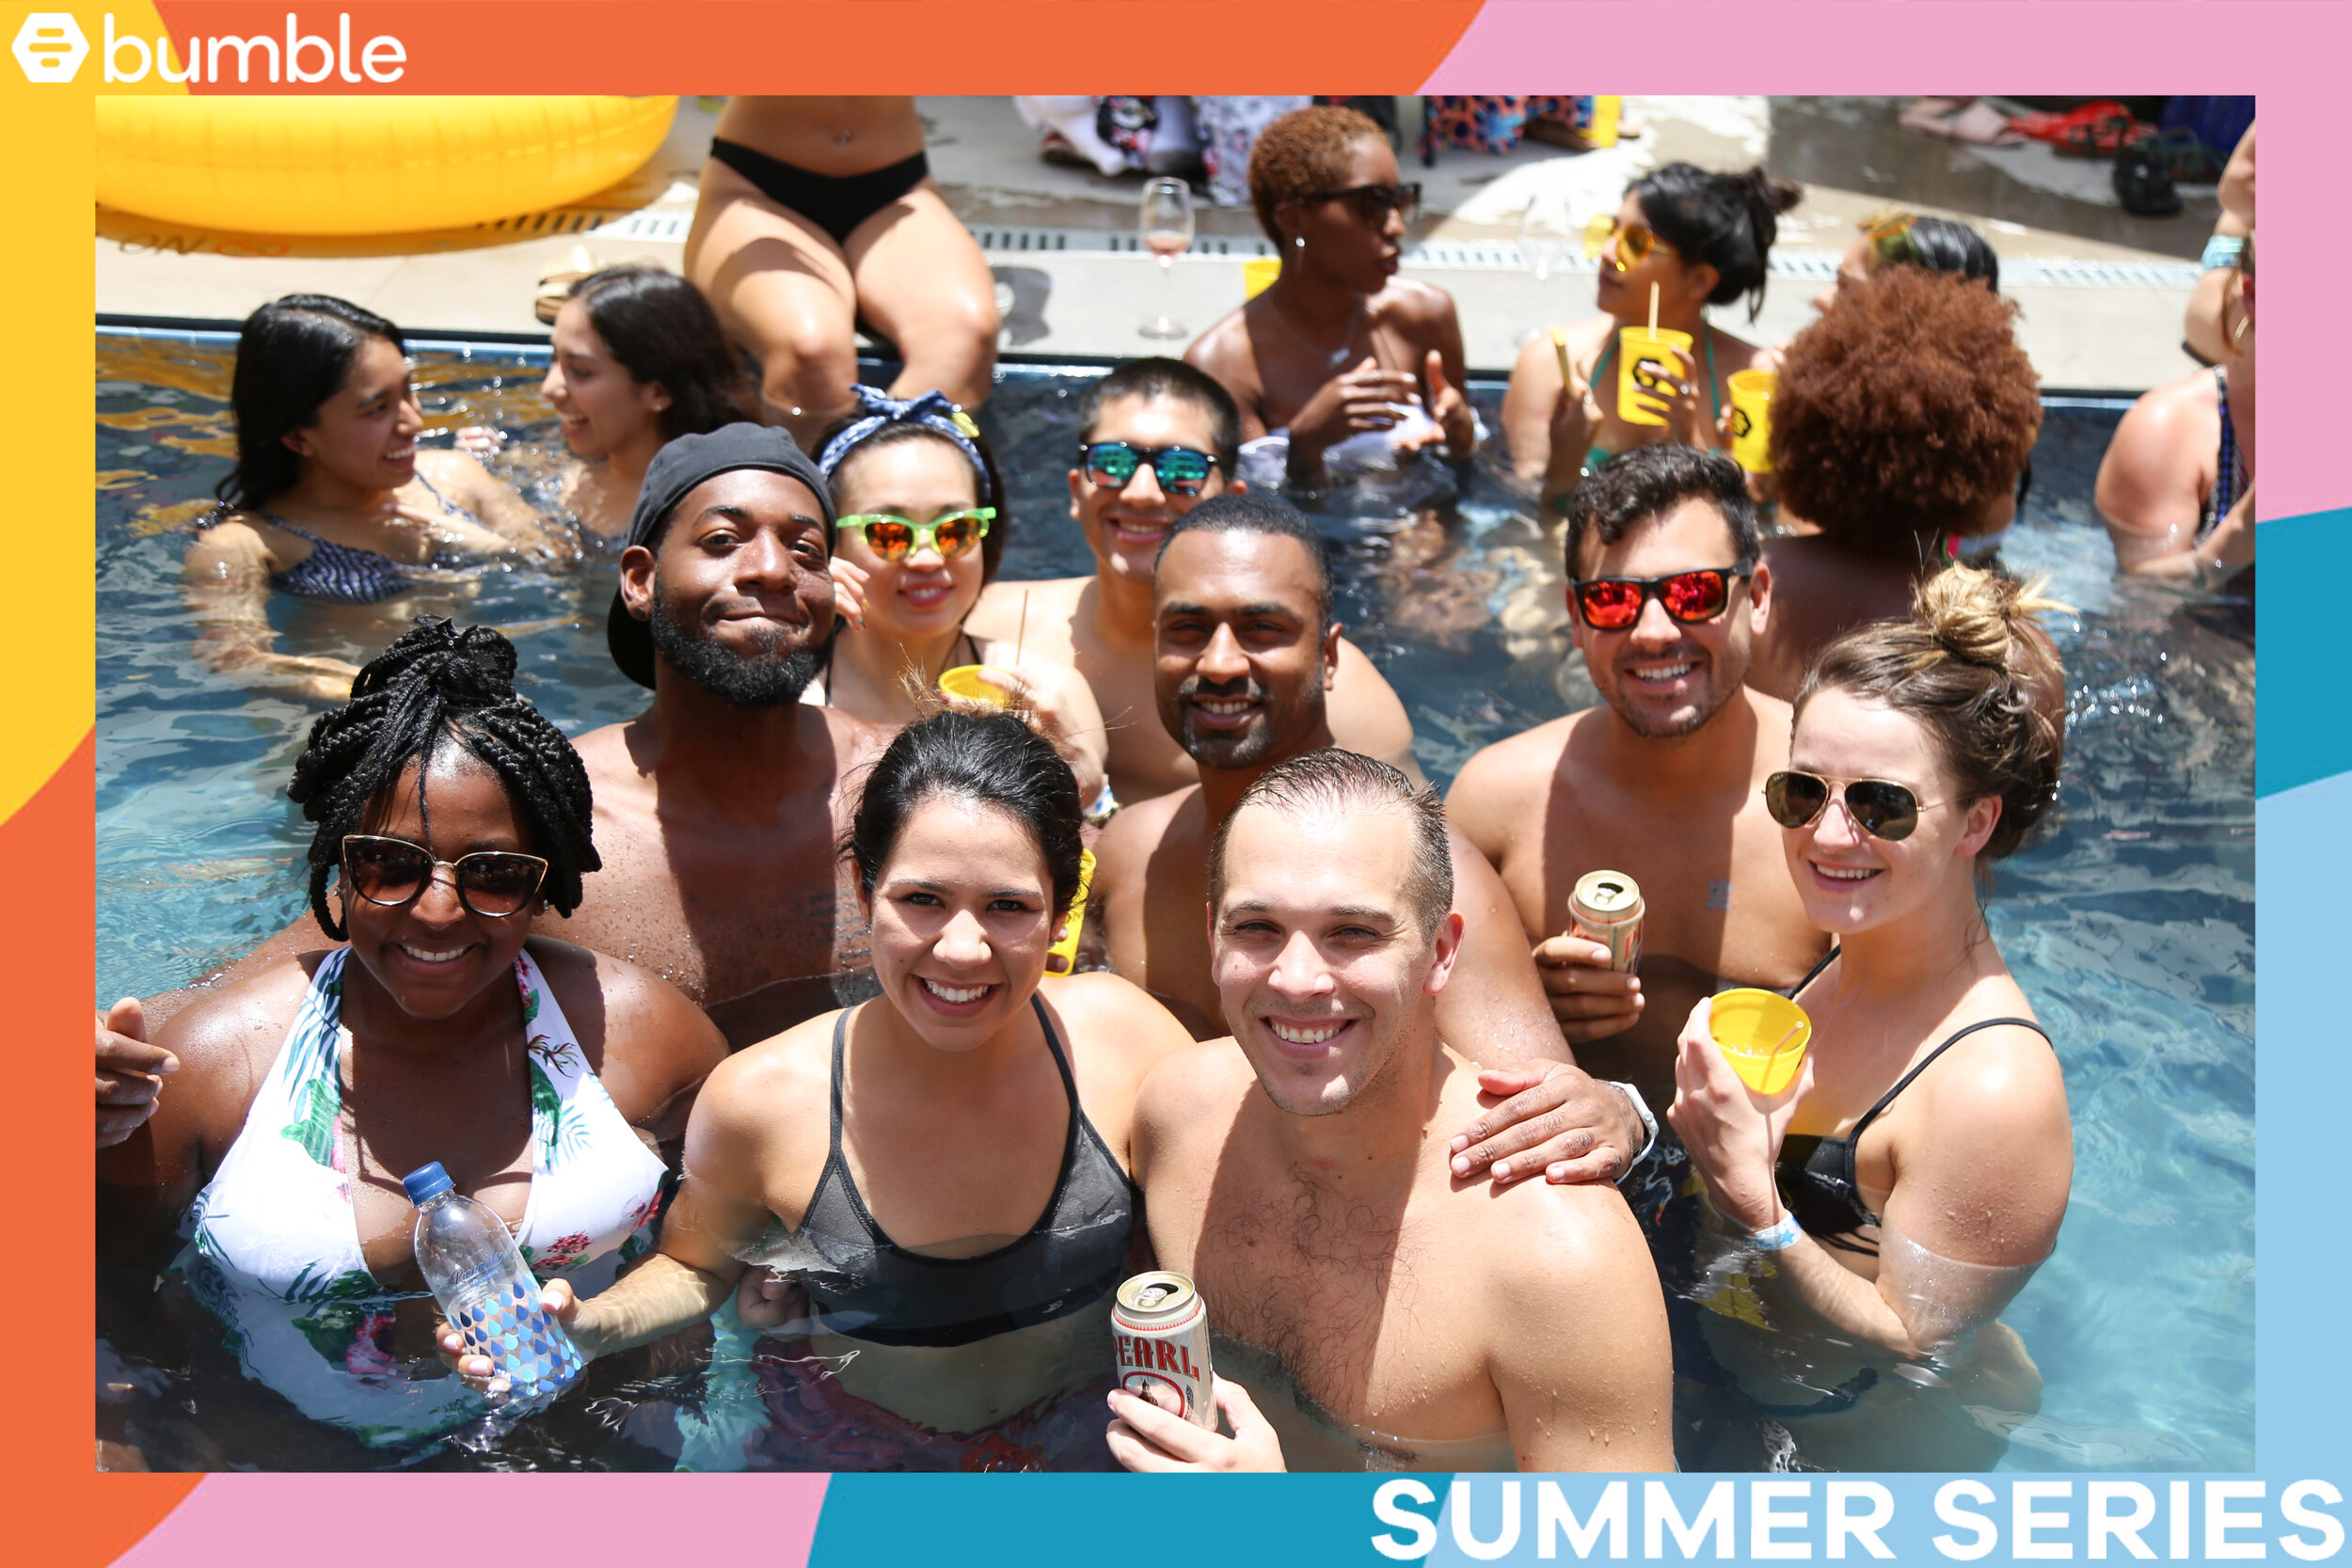 Oh Happy Day Booth - Bumble East Austin Hotel Pool Party Watermarked-90.jpg